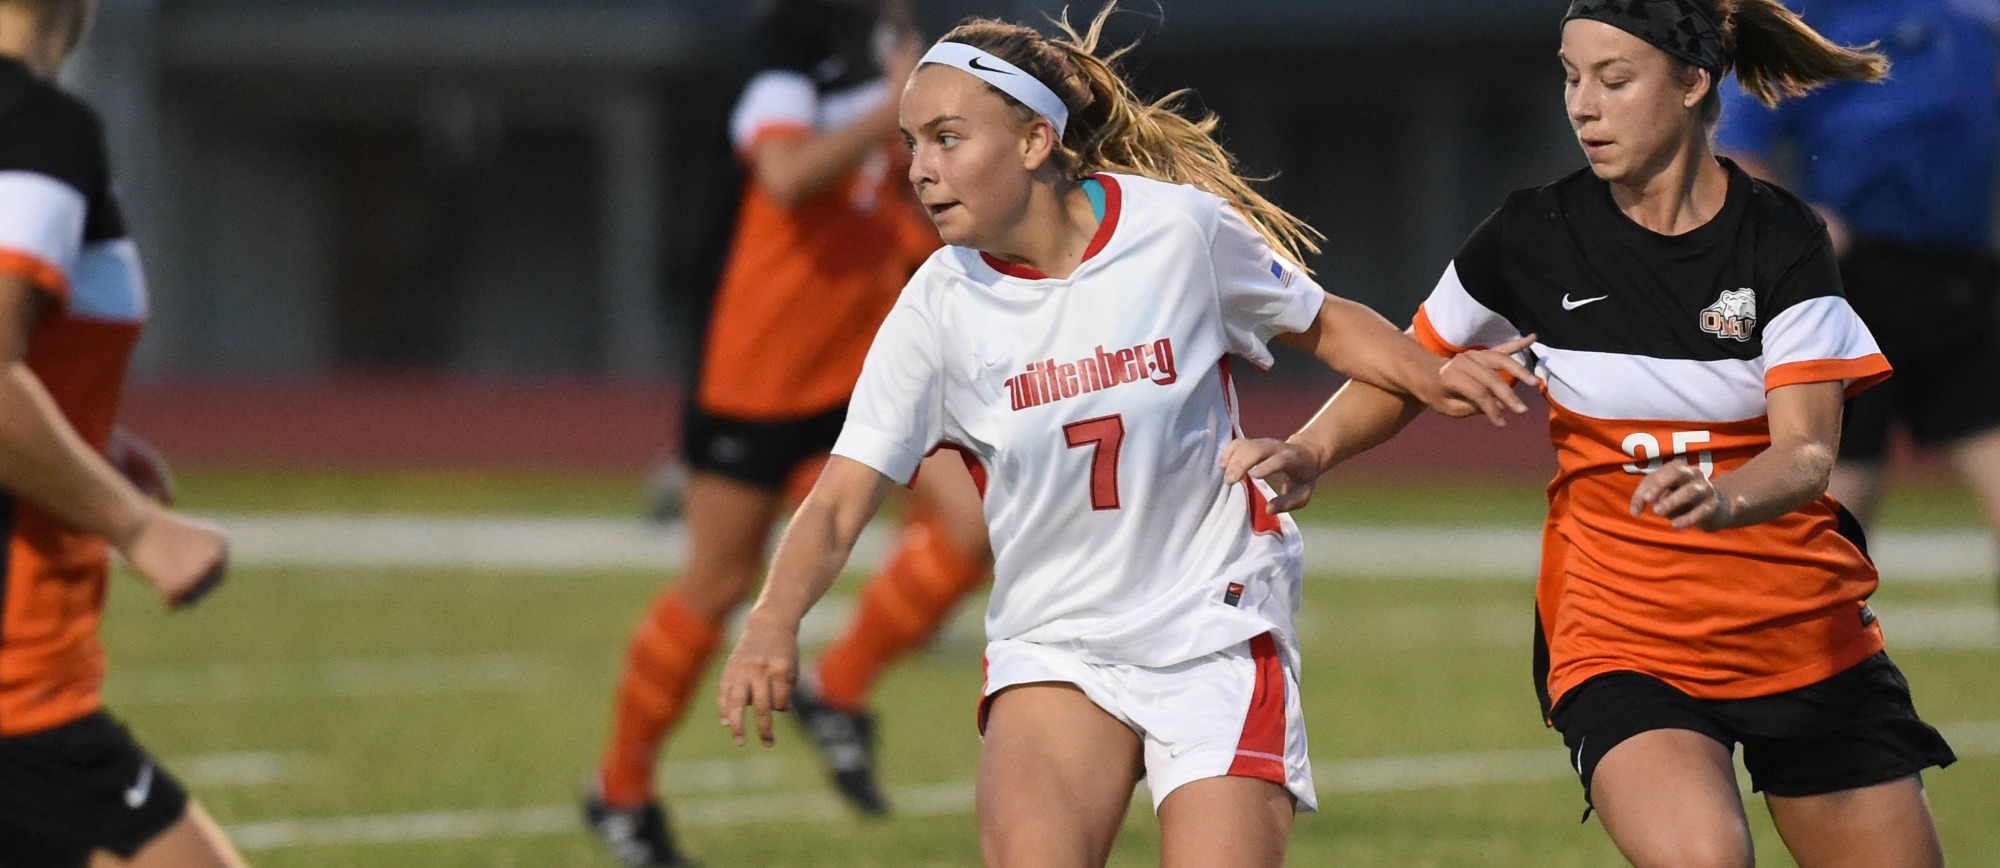 Women's Soccer Nets Two in Second Half to Move Past Hanover